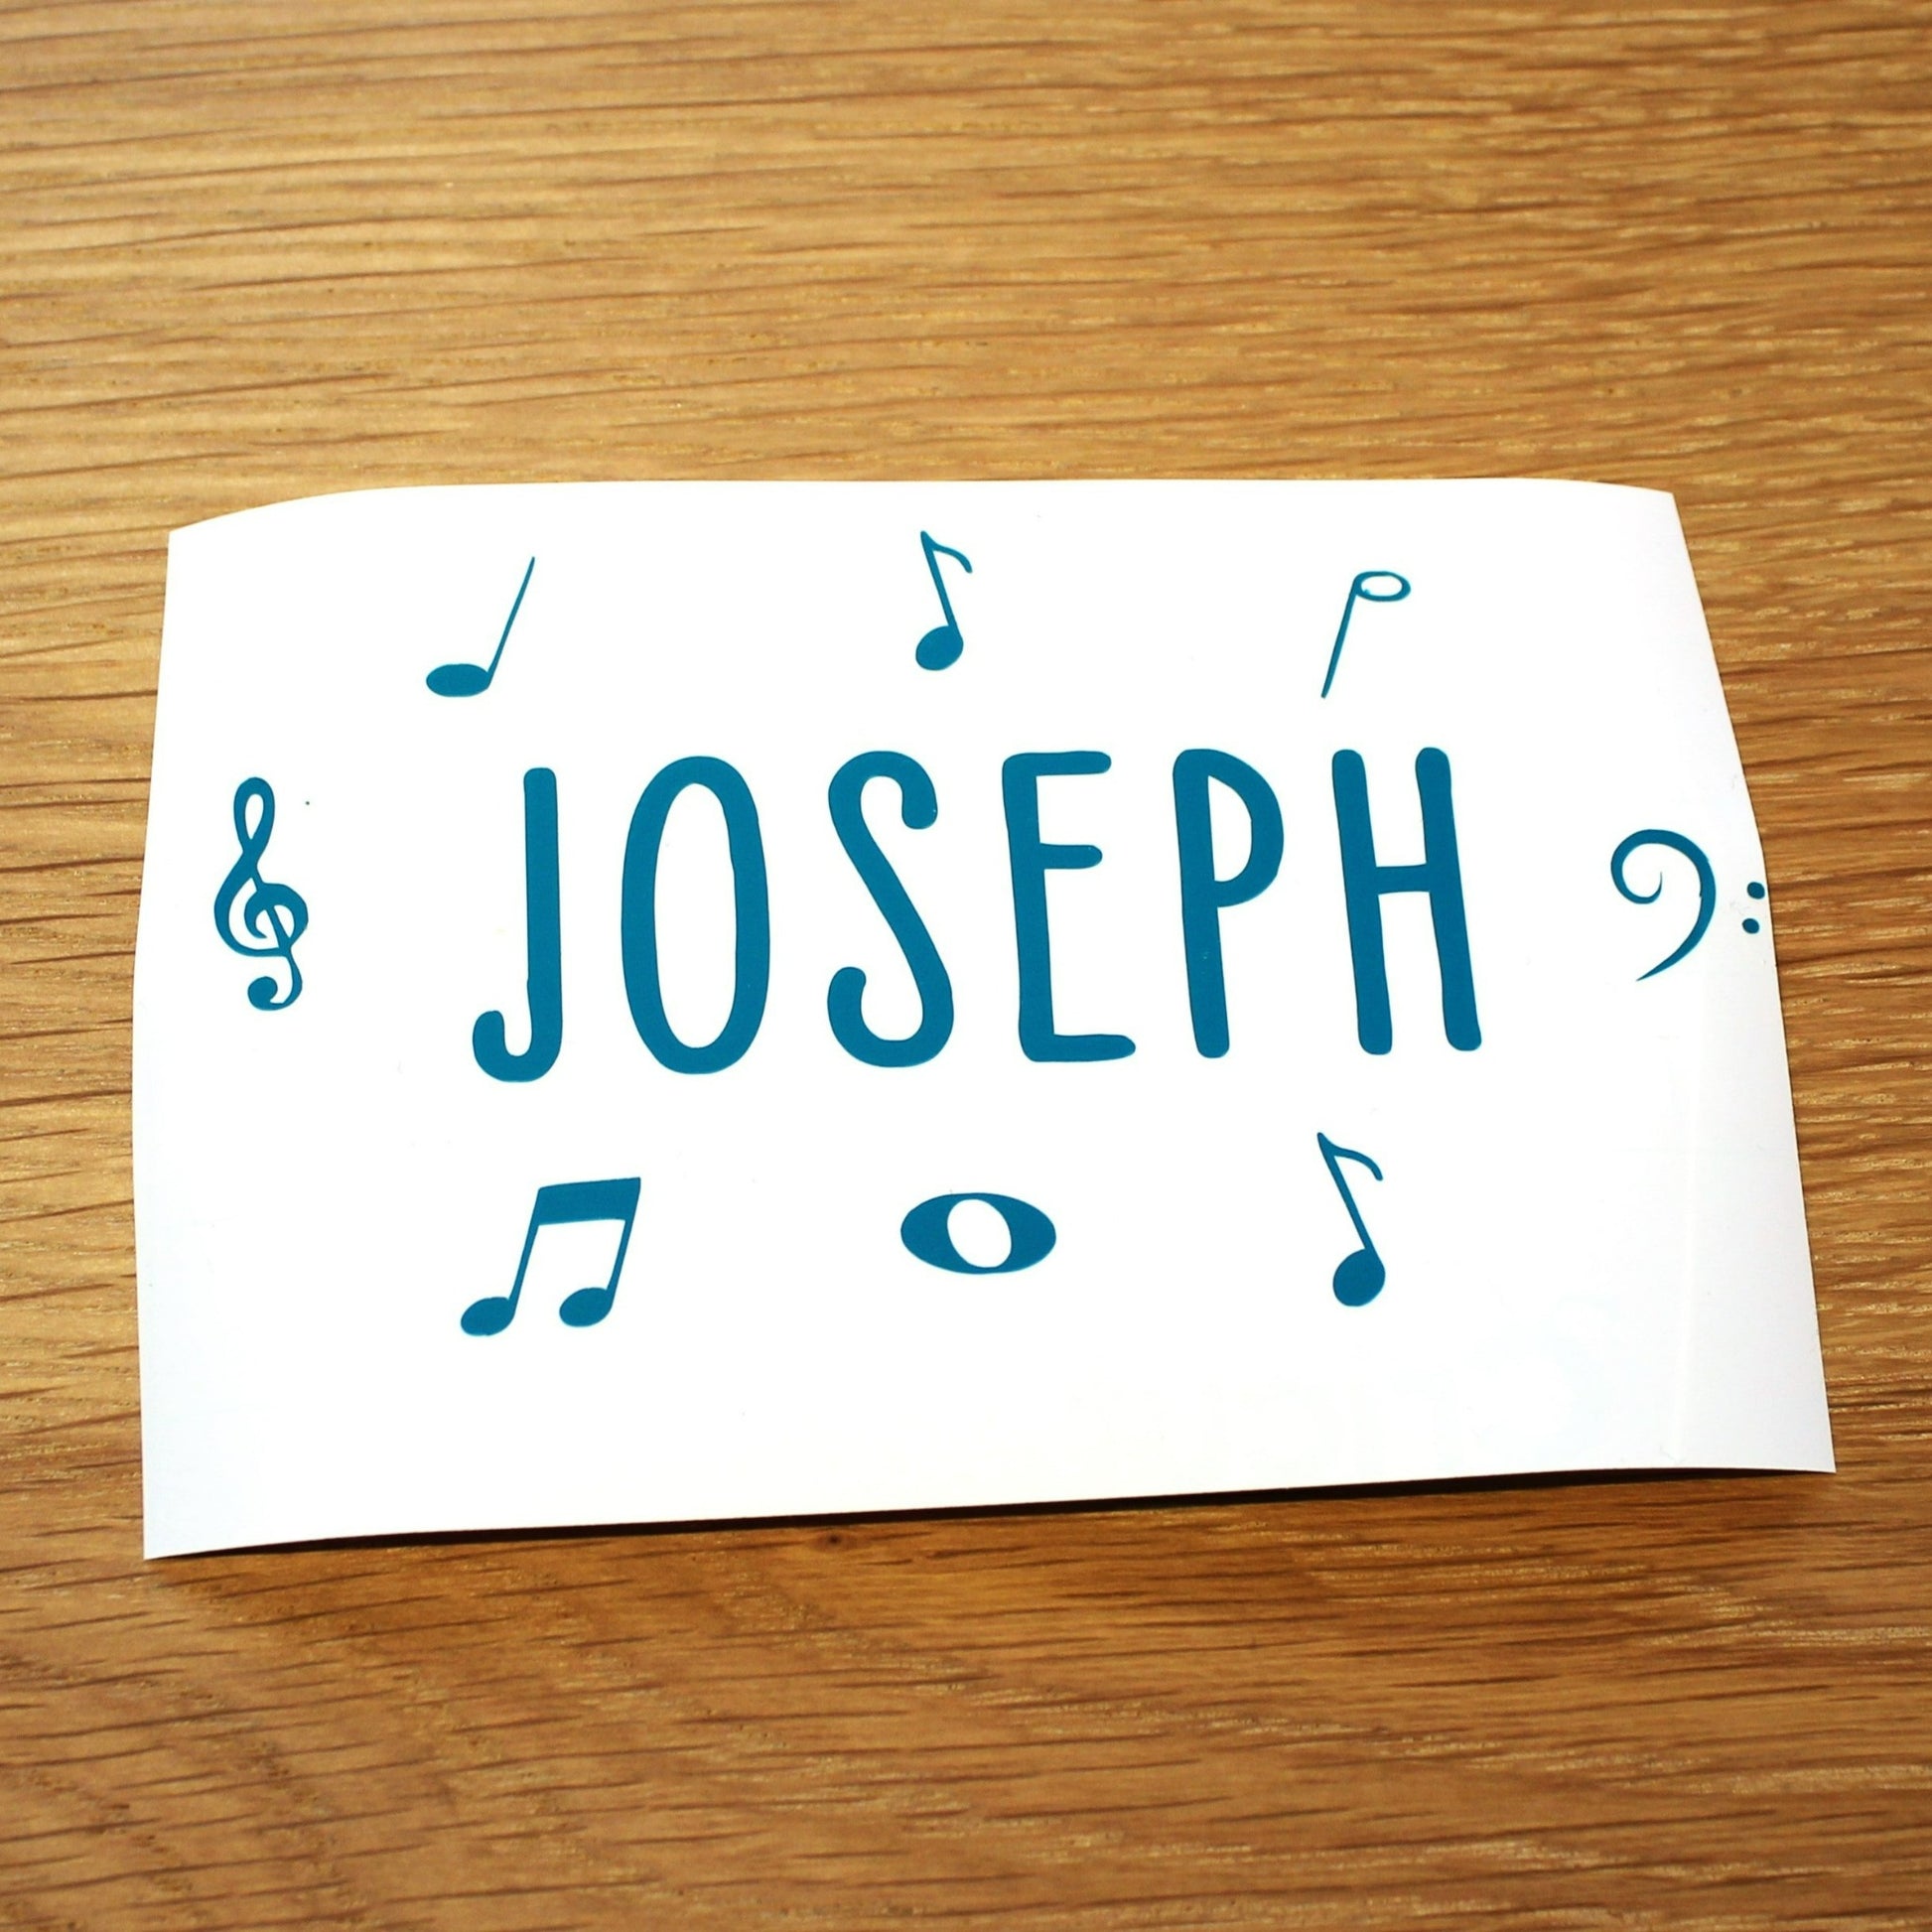 Name in plain capitals with music symbols around. Teal lettering.